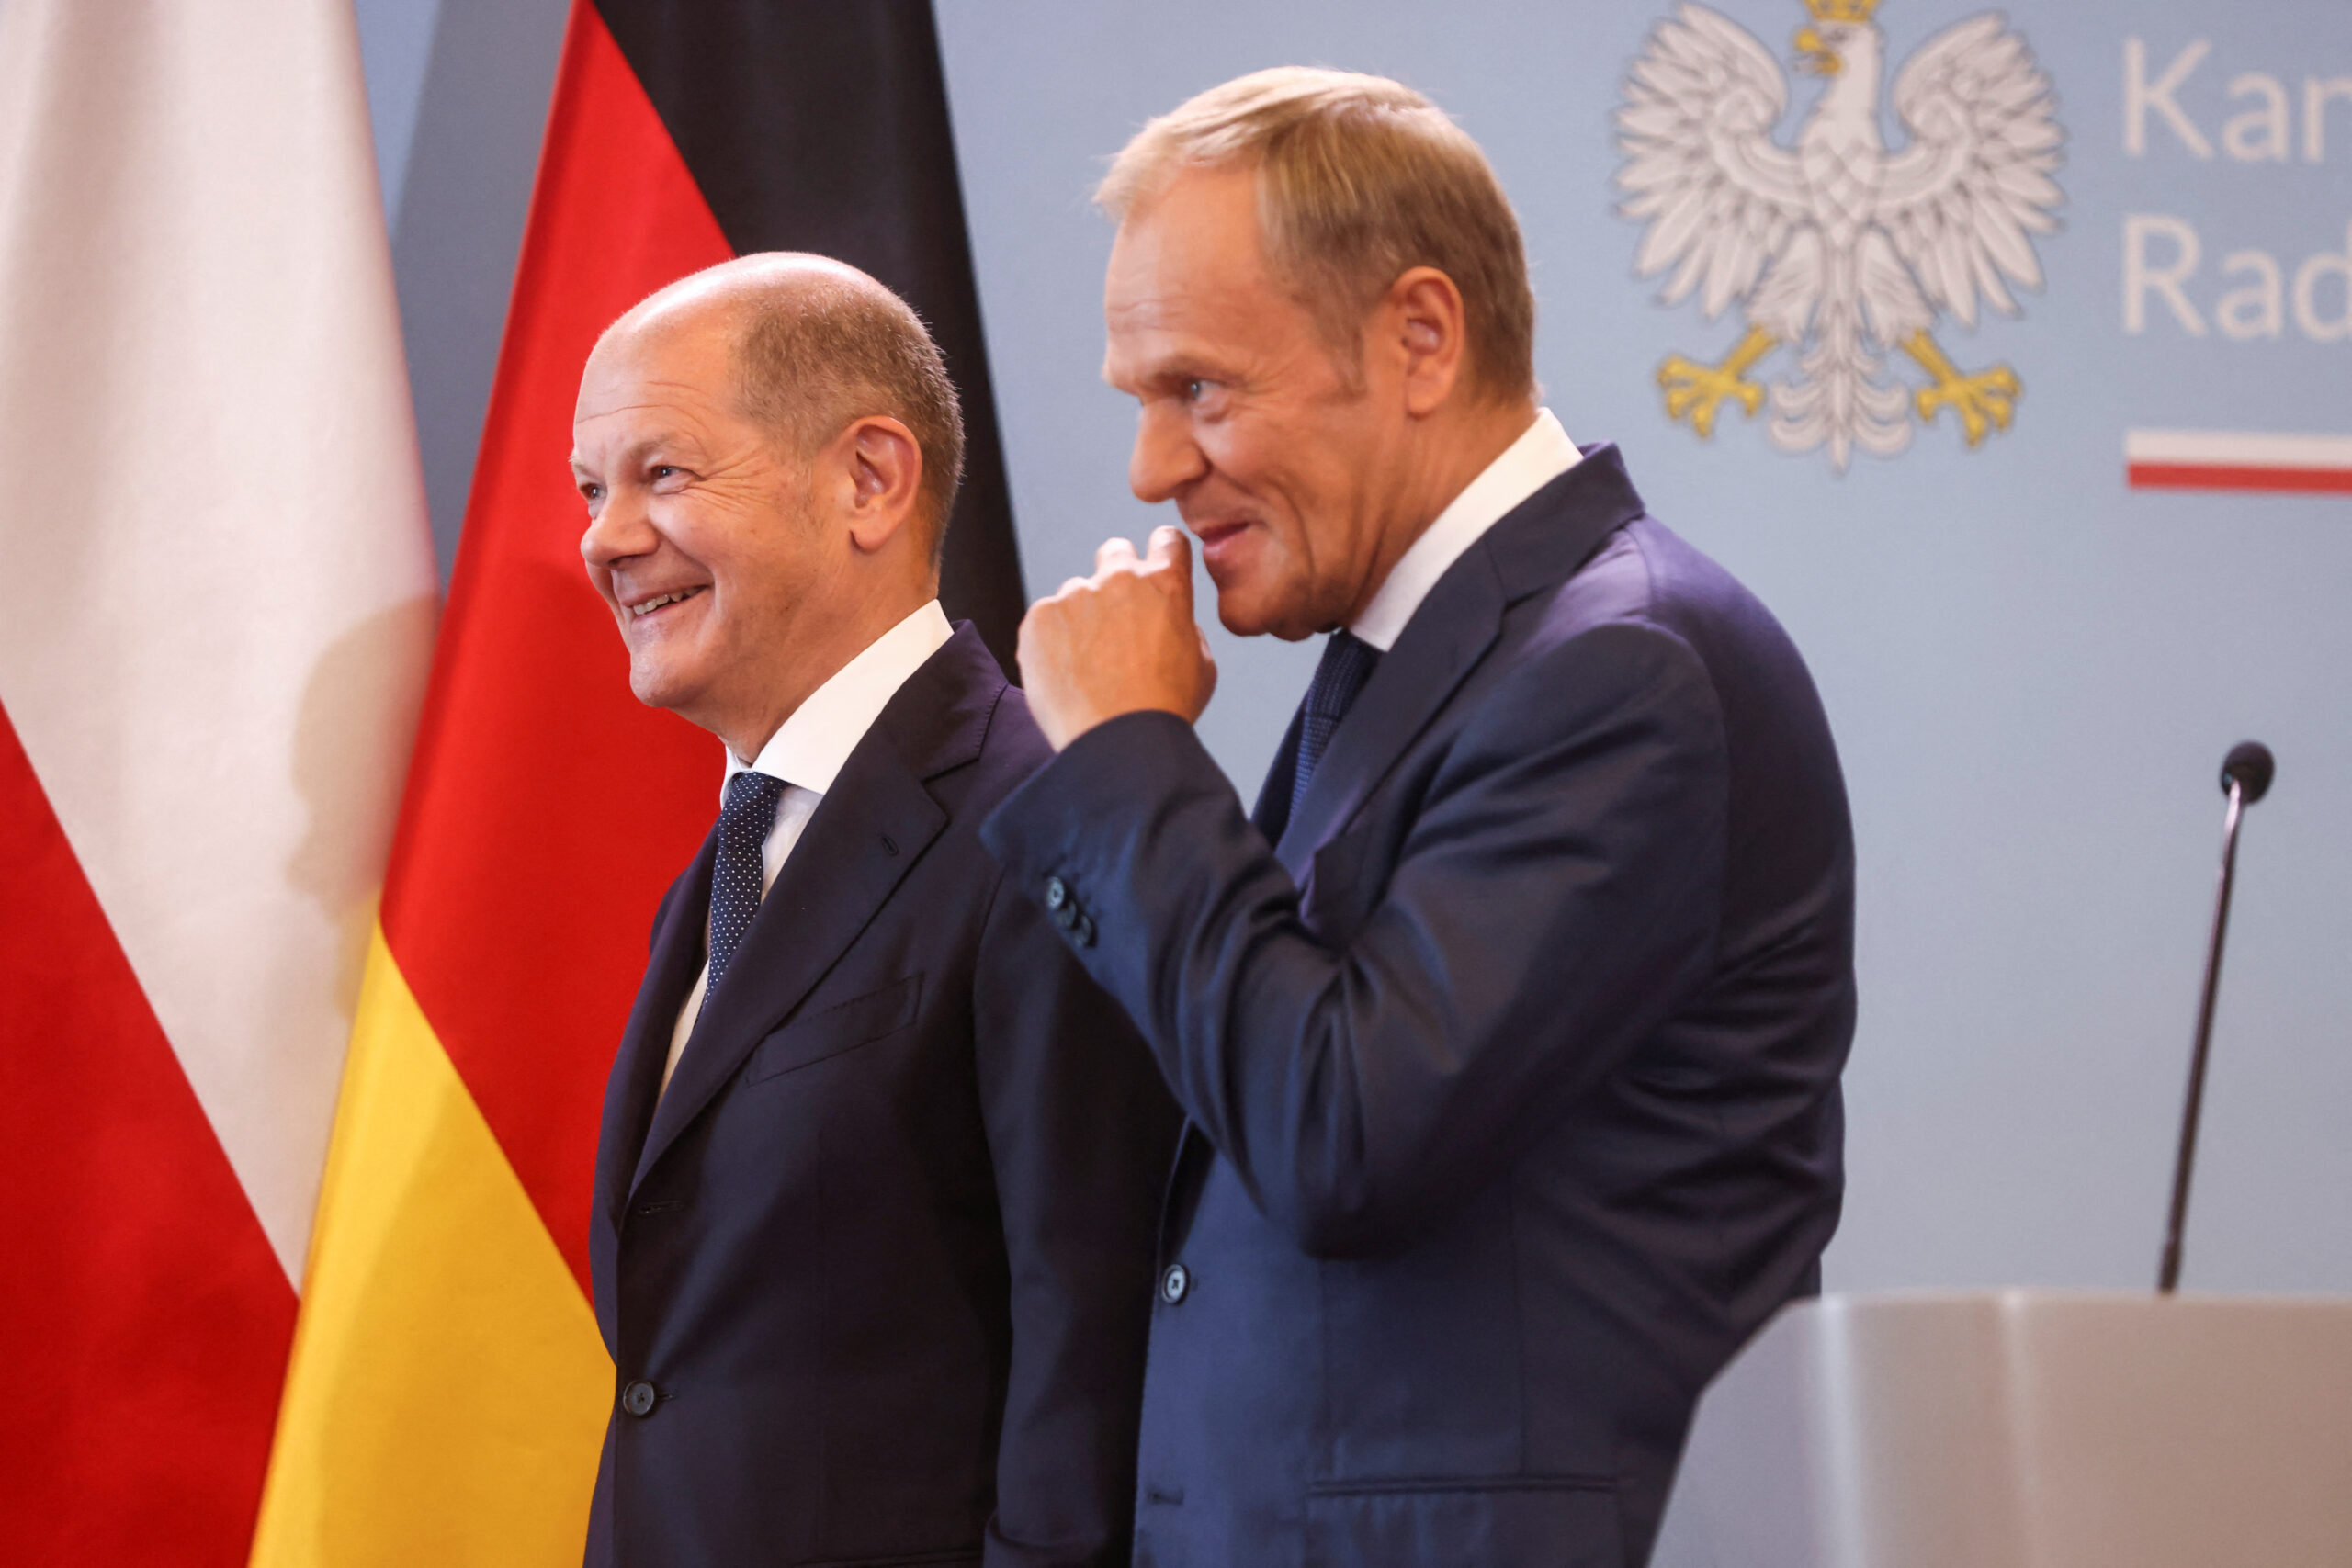 Germany and Poland strengthen defense cooperation amid turbulent times